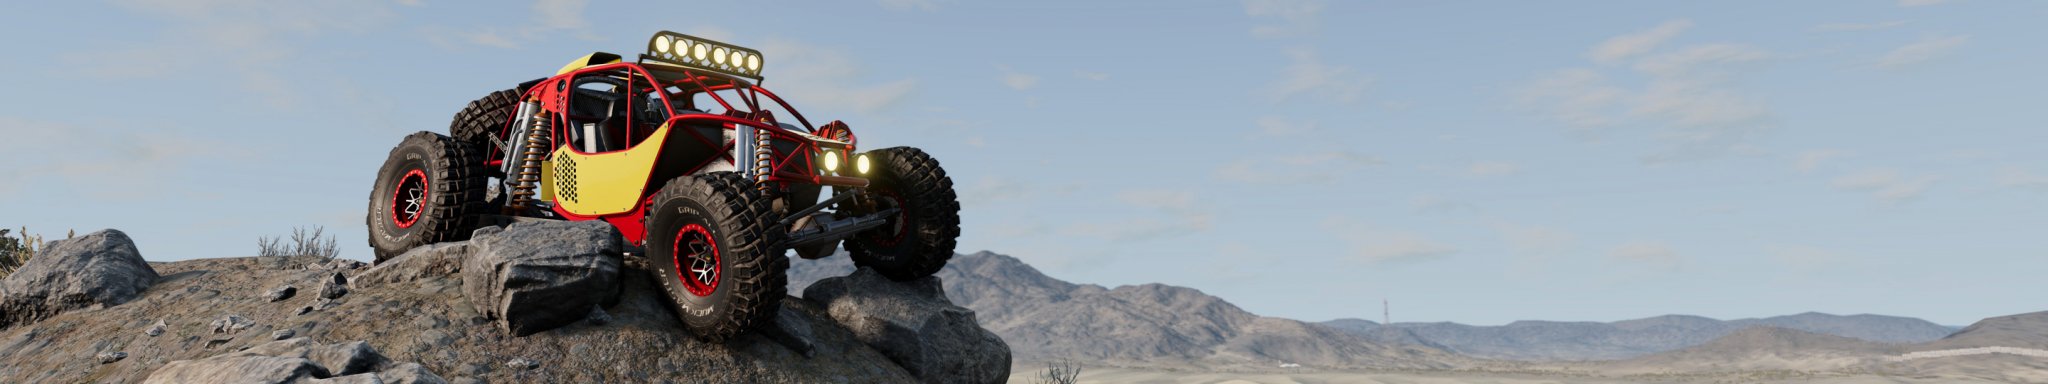 2 BeamNG ROCK BASHER at CELL TOWER copy.jpg